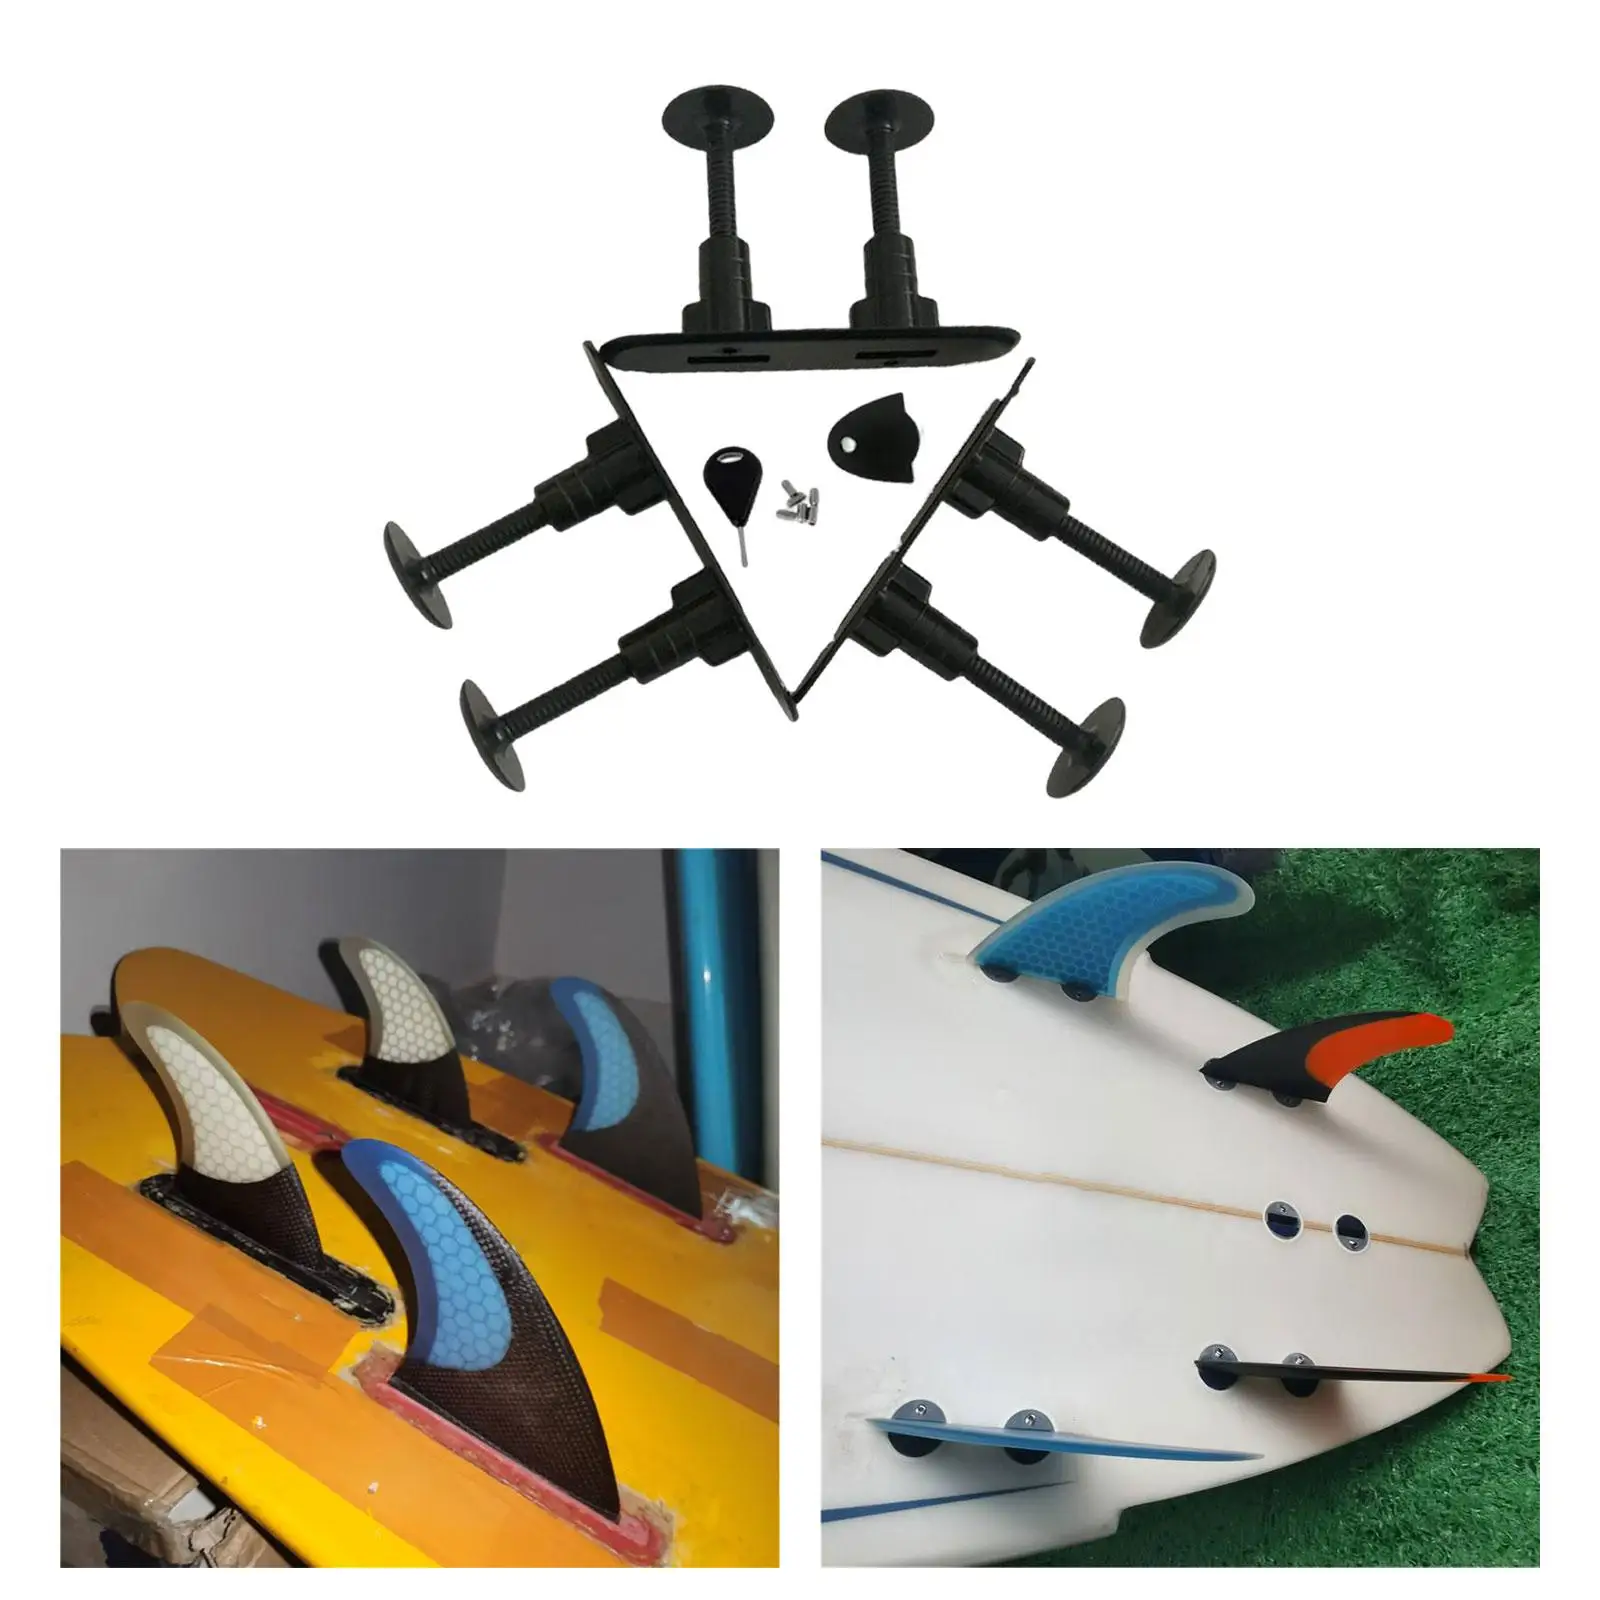 3x Surfboard Fin Plugs with Wrench and Screws Soft Top Soft Plug PVC